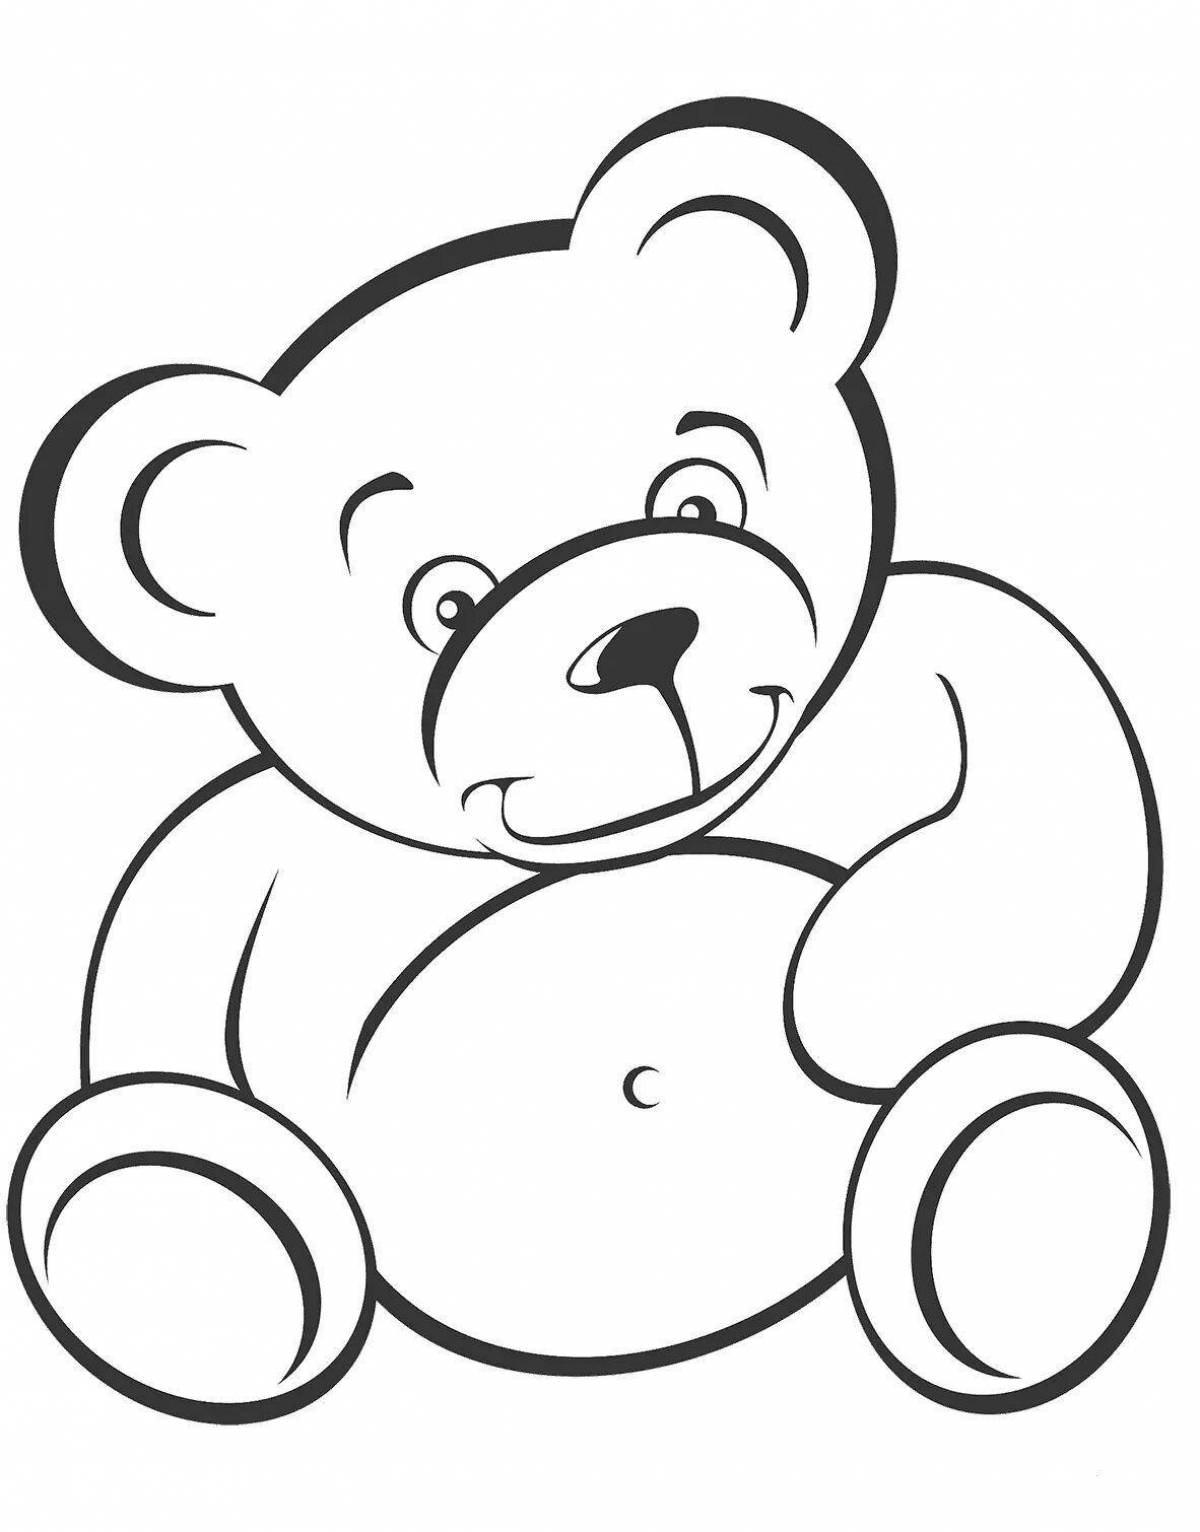 Snuggle teddy bear coloring page